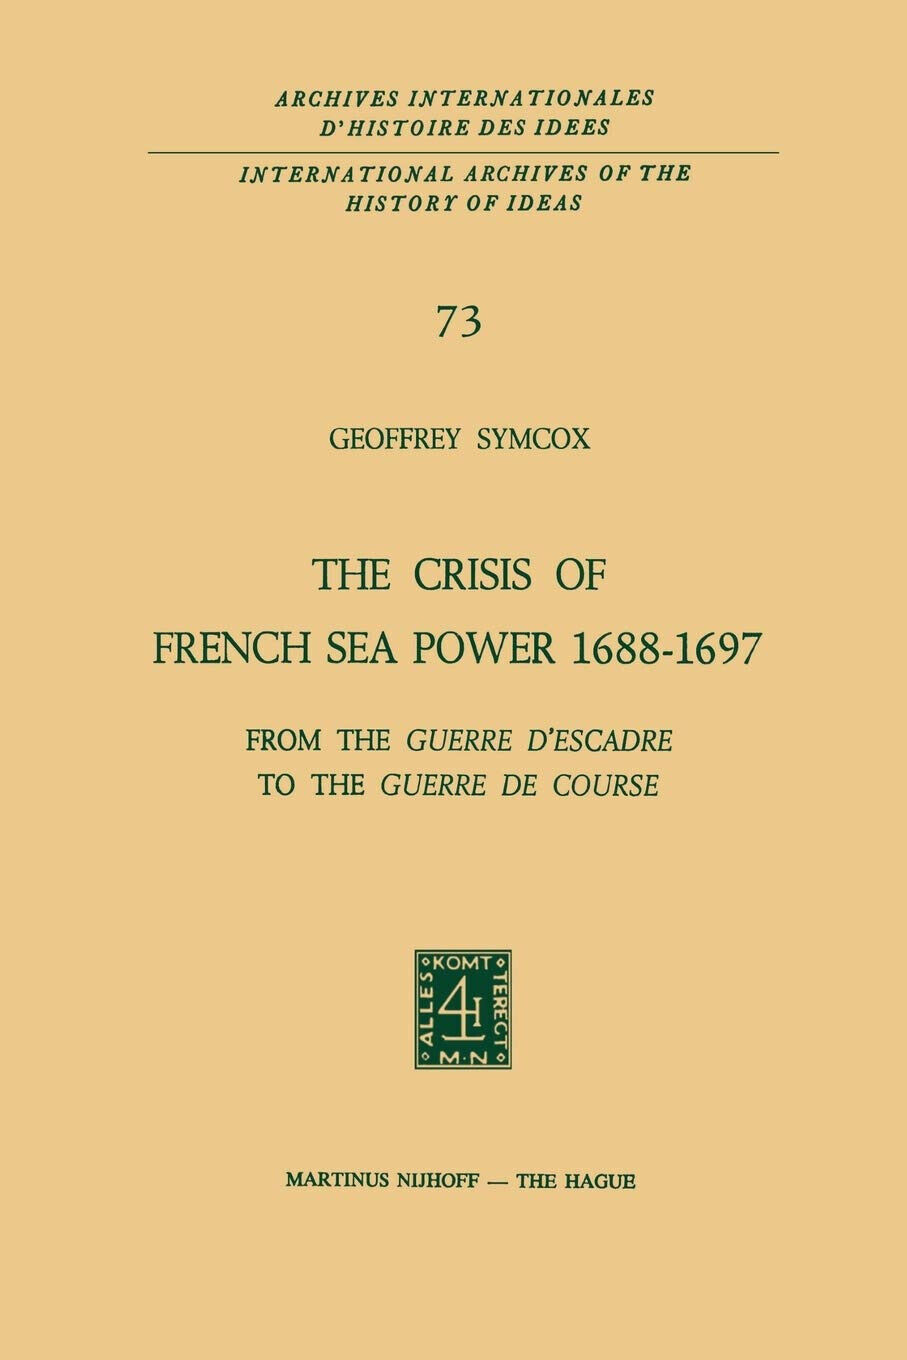 The Crisis of French Sea Power, 1688-1697 - Geoffrey Symcox - Springer, 2011